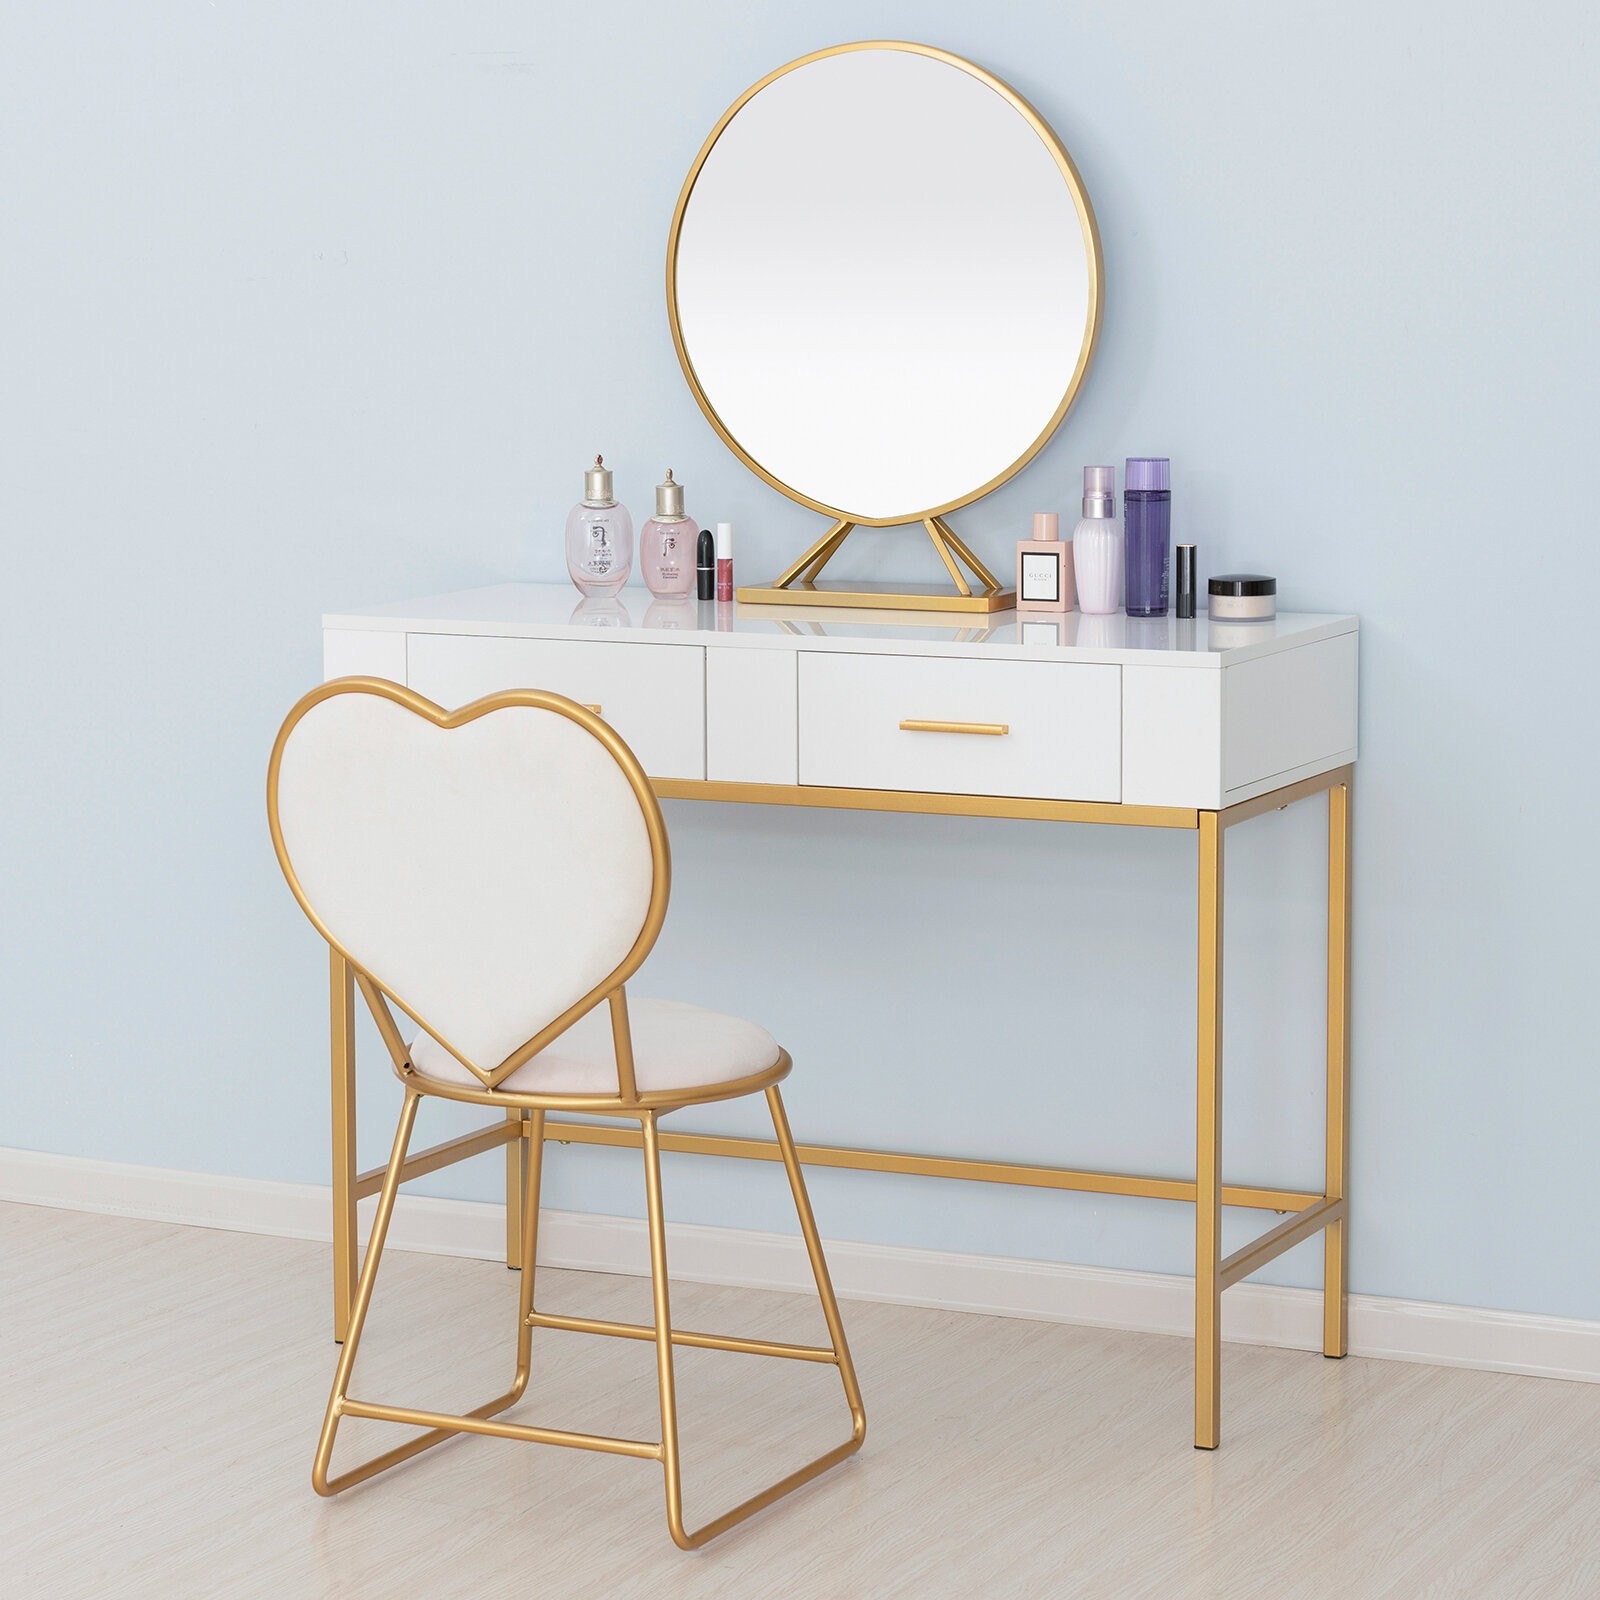 Get Ready in Style with a Luxe Make-up Vanity for Your Bedroom